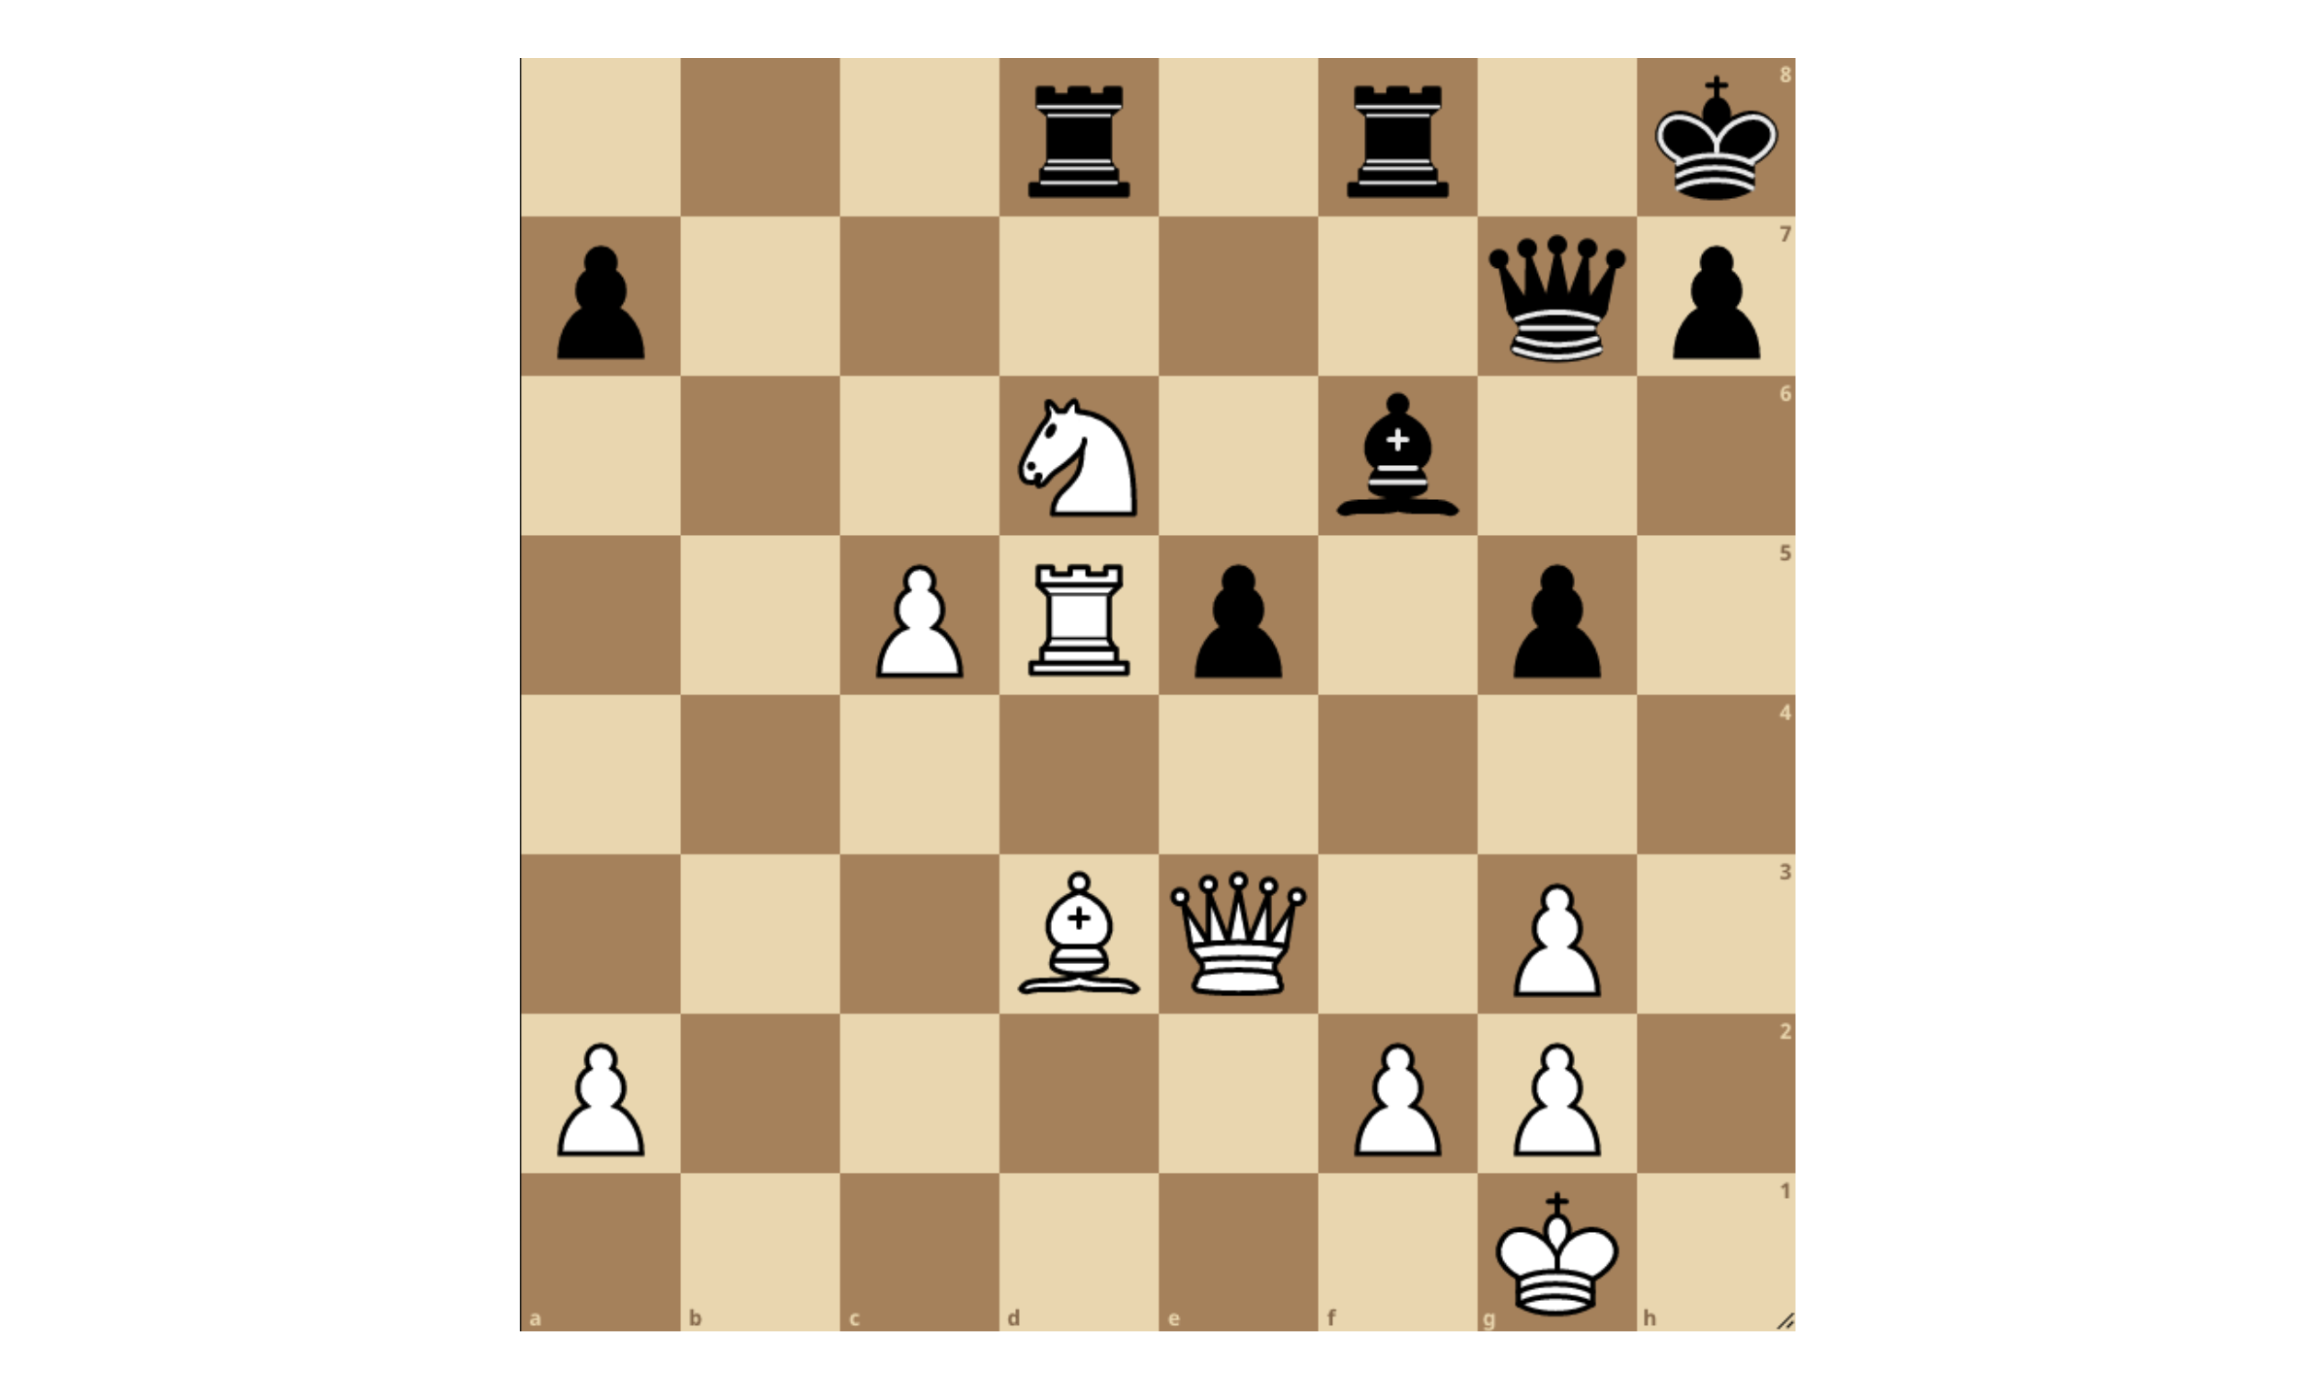 Figure 1. Quantitative analysis would posit that black is winning due to his extra rook for white’s knight and pawn. However, qualitative analysis provides a more complete picture of black’s predicament.